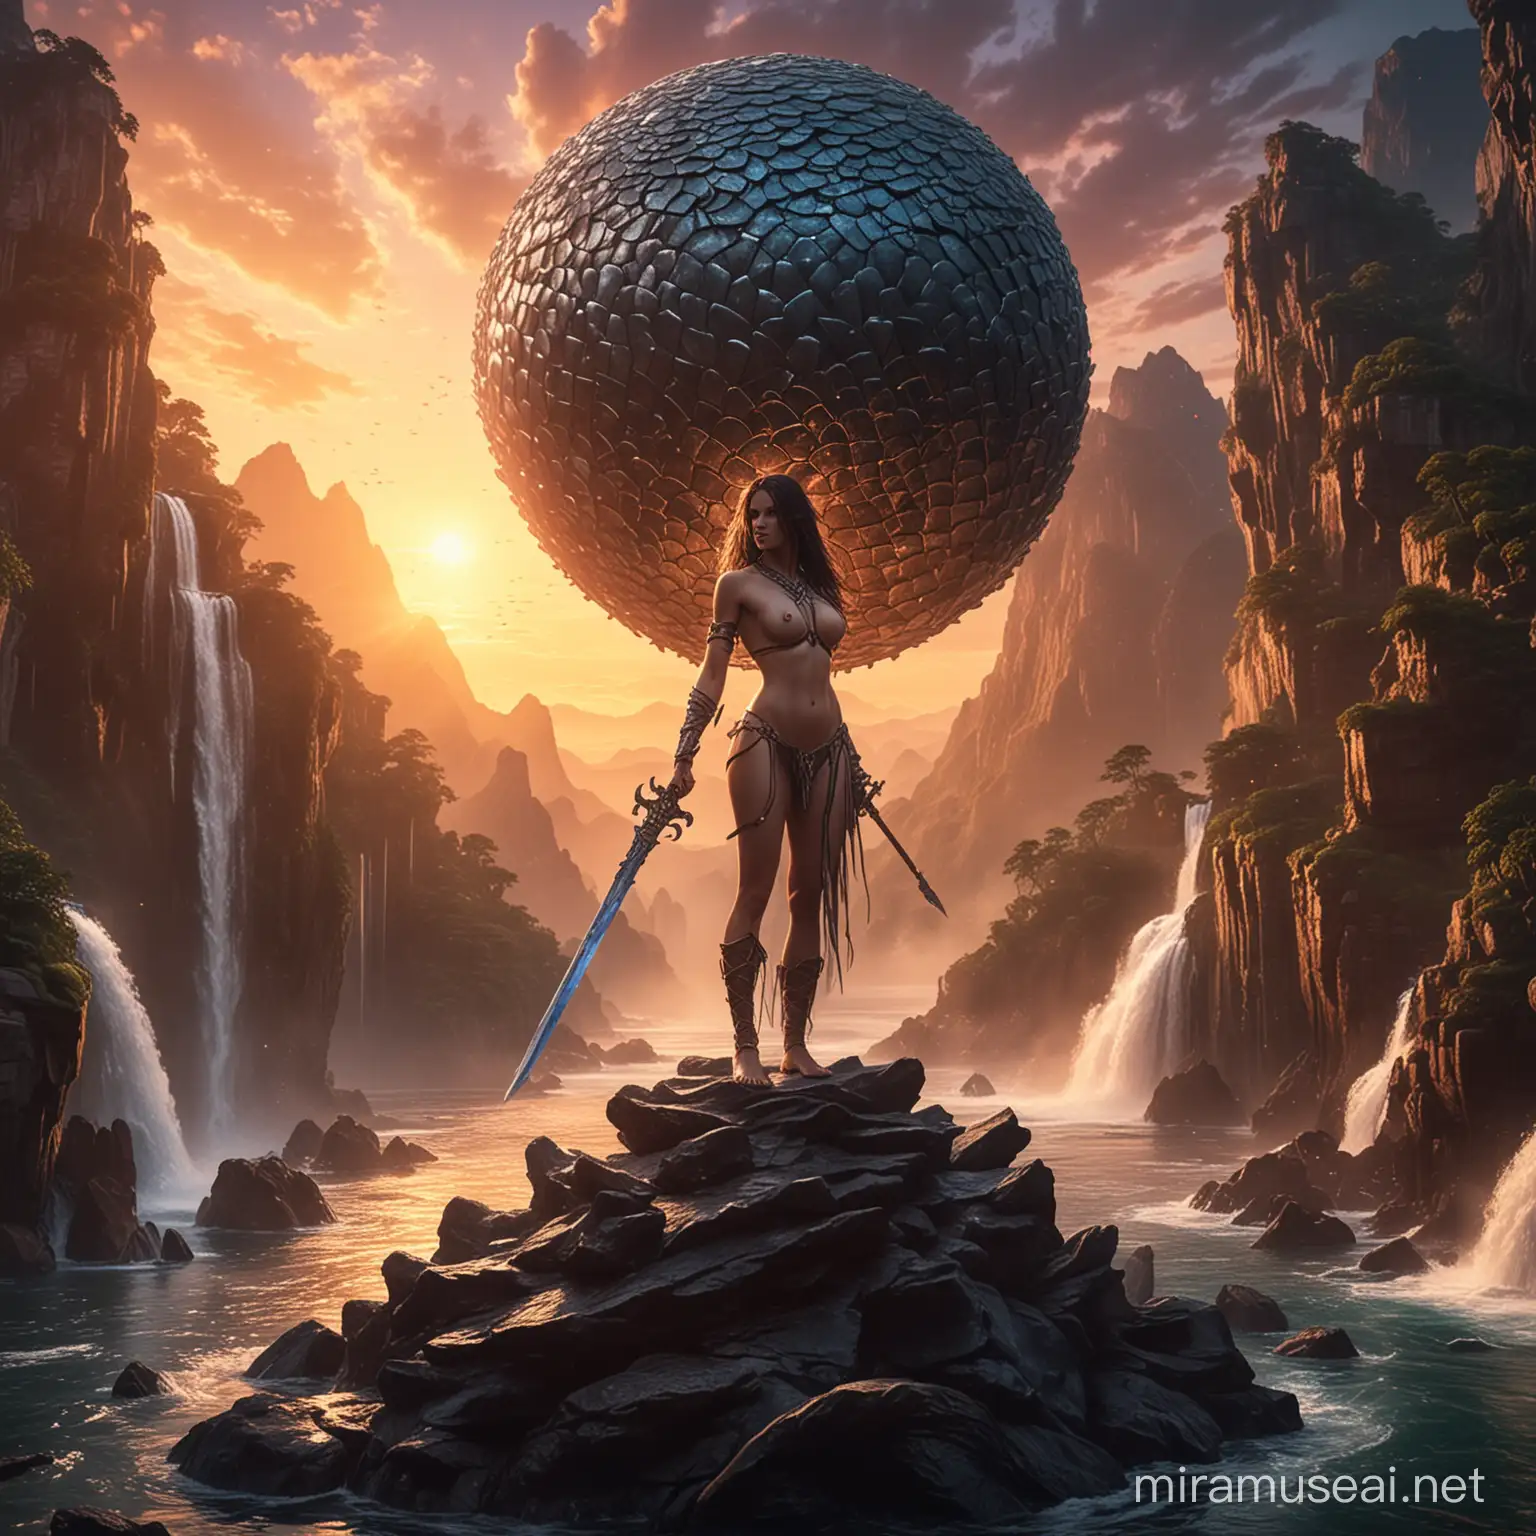 A naked woman covered with dragon scales, holding a giant sword, ontop of a sphere, high fantasy, waterfall background planet at 
sunset 